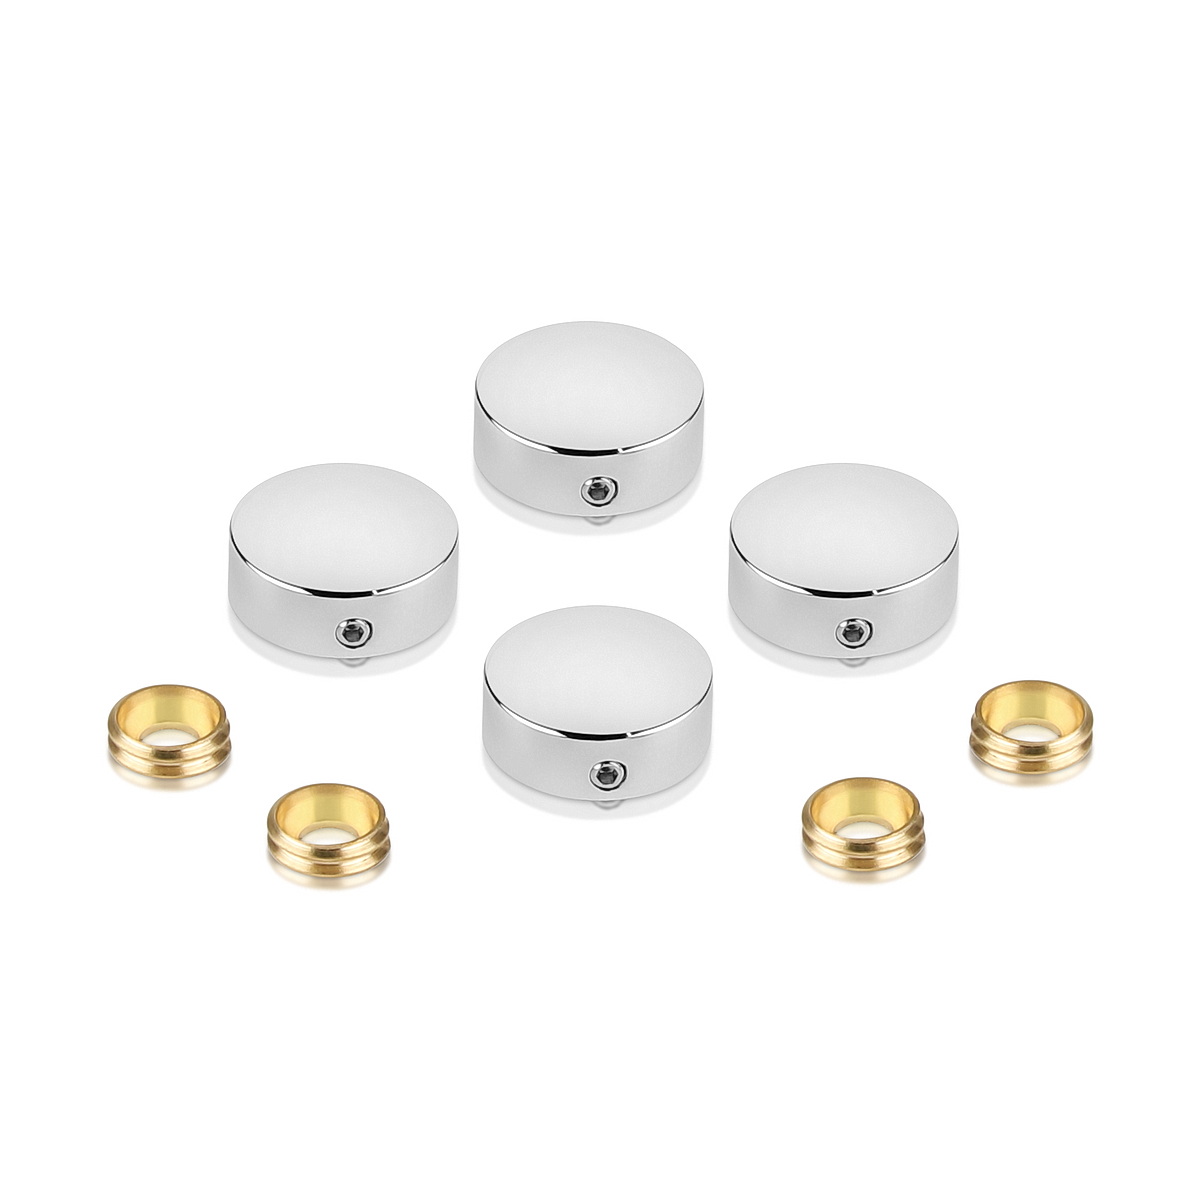 Set of 4 Locking Screw Cover Diameter 11/16'', Polished Stainless Steel Finish (Indoor Use Only)